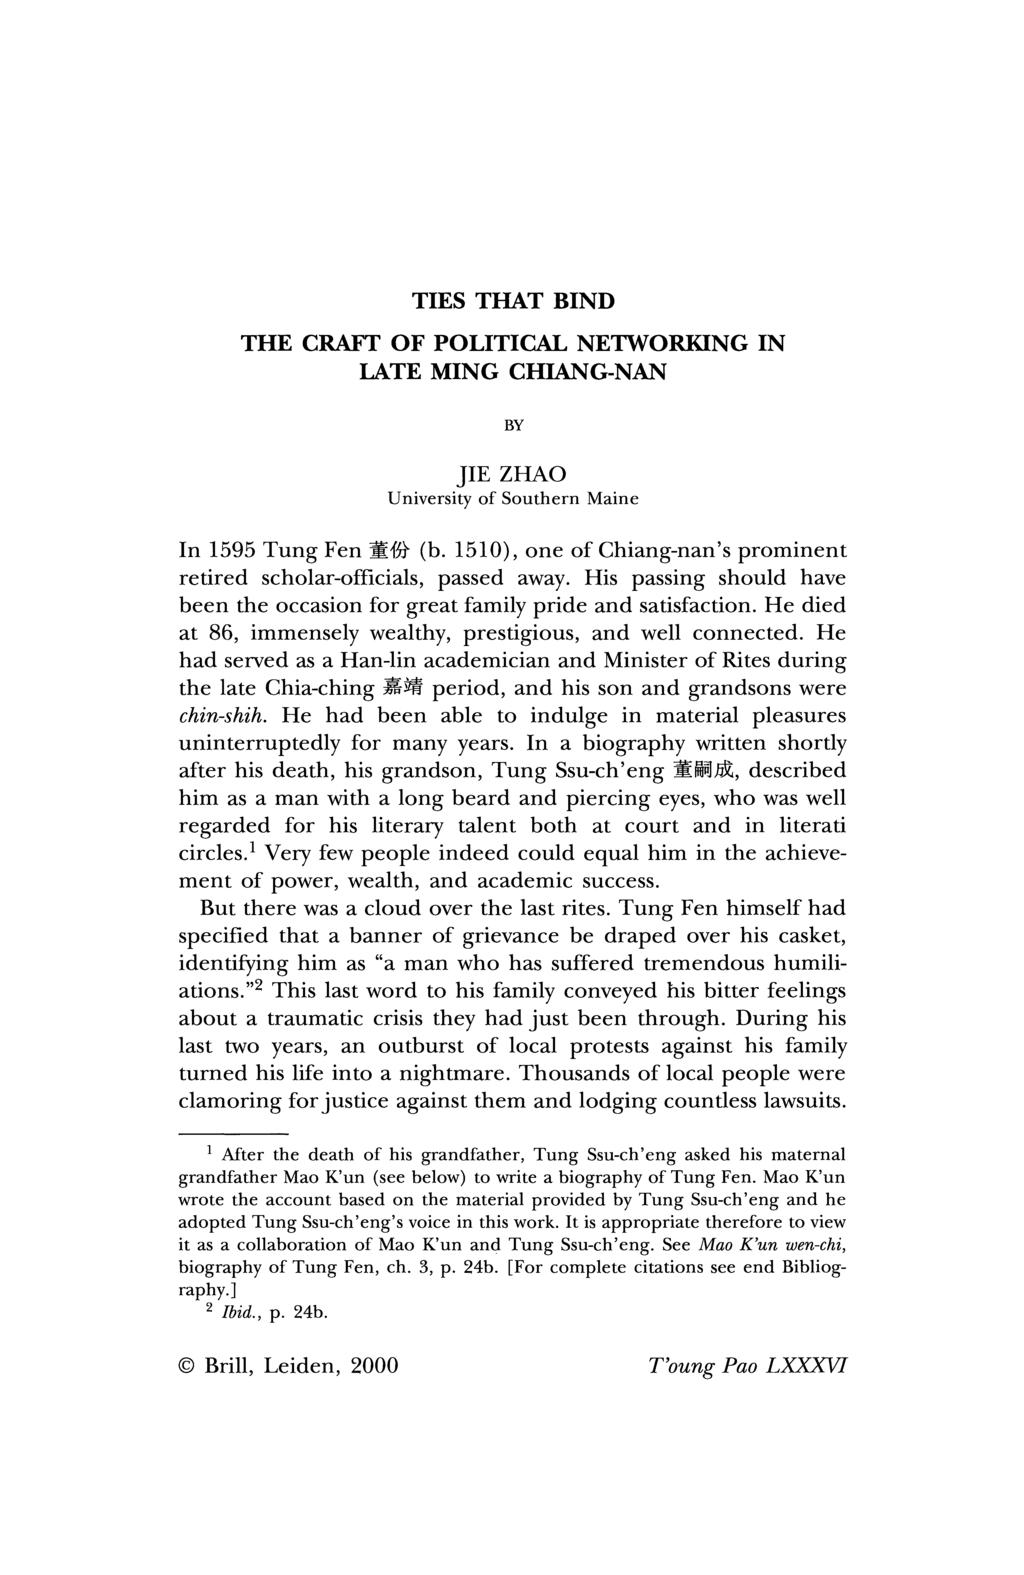 TIES THAT BIND THE CRAliT OF POLITICAL NETWORKING IN LATE MING CHIANG-NAN sy JIE ZHAO University of Southern Maine In 1595 Tung Fen WSh' (b.